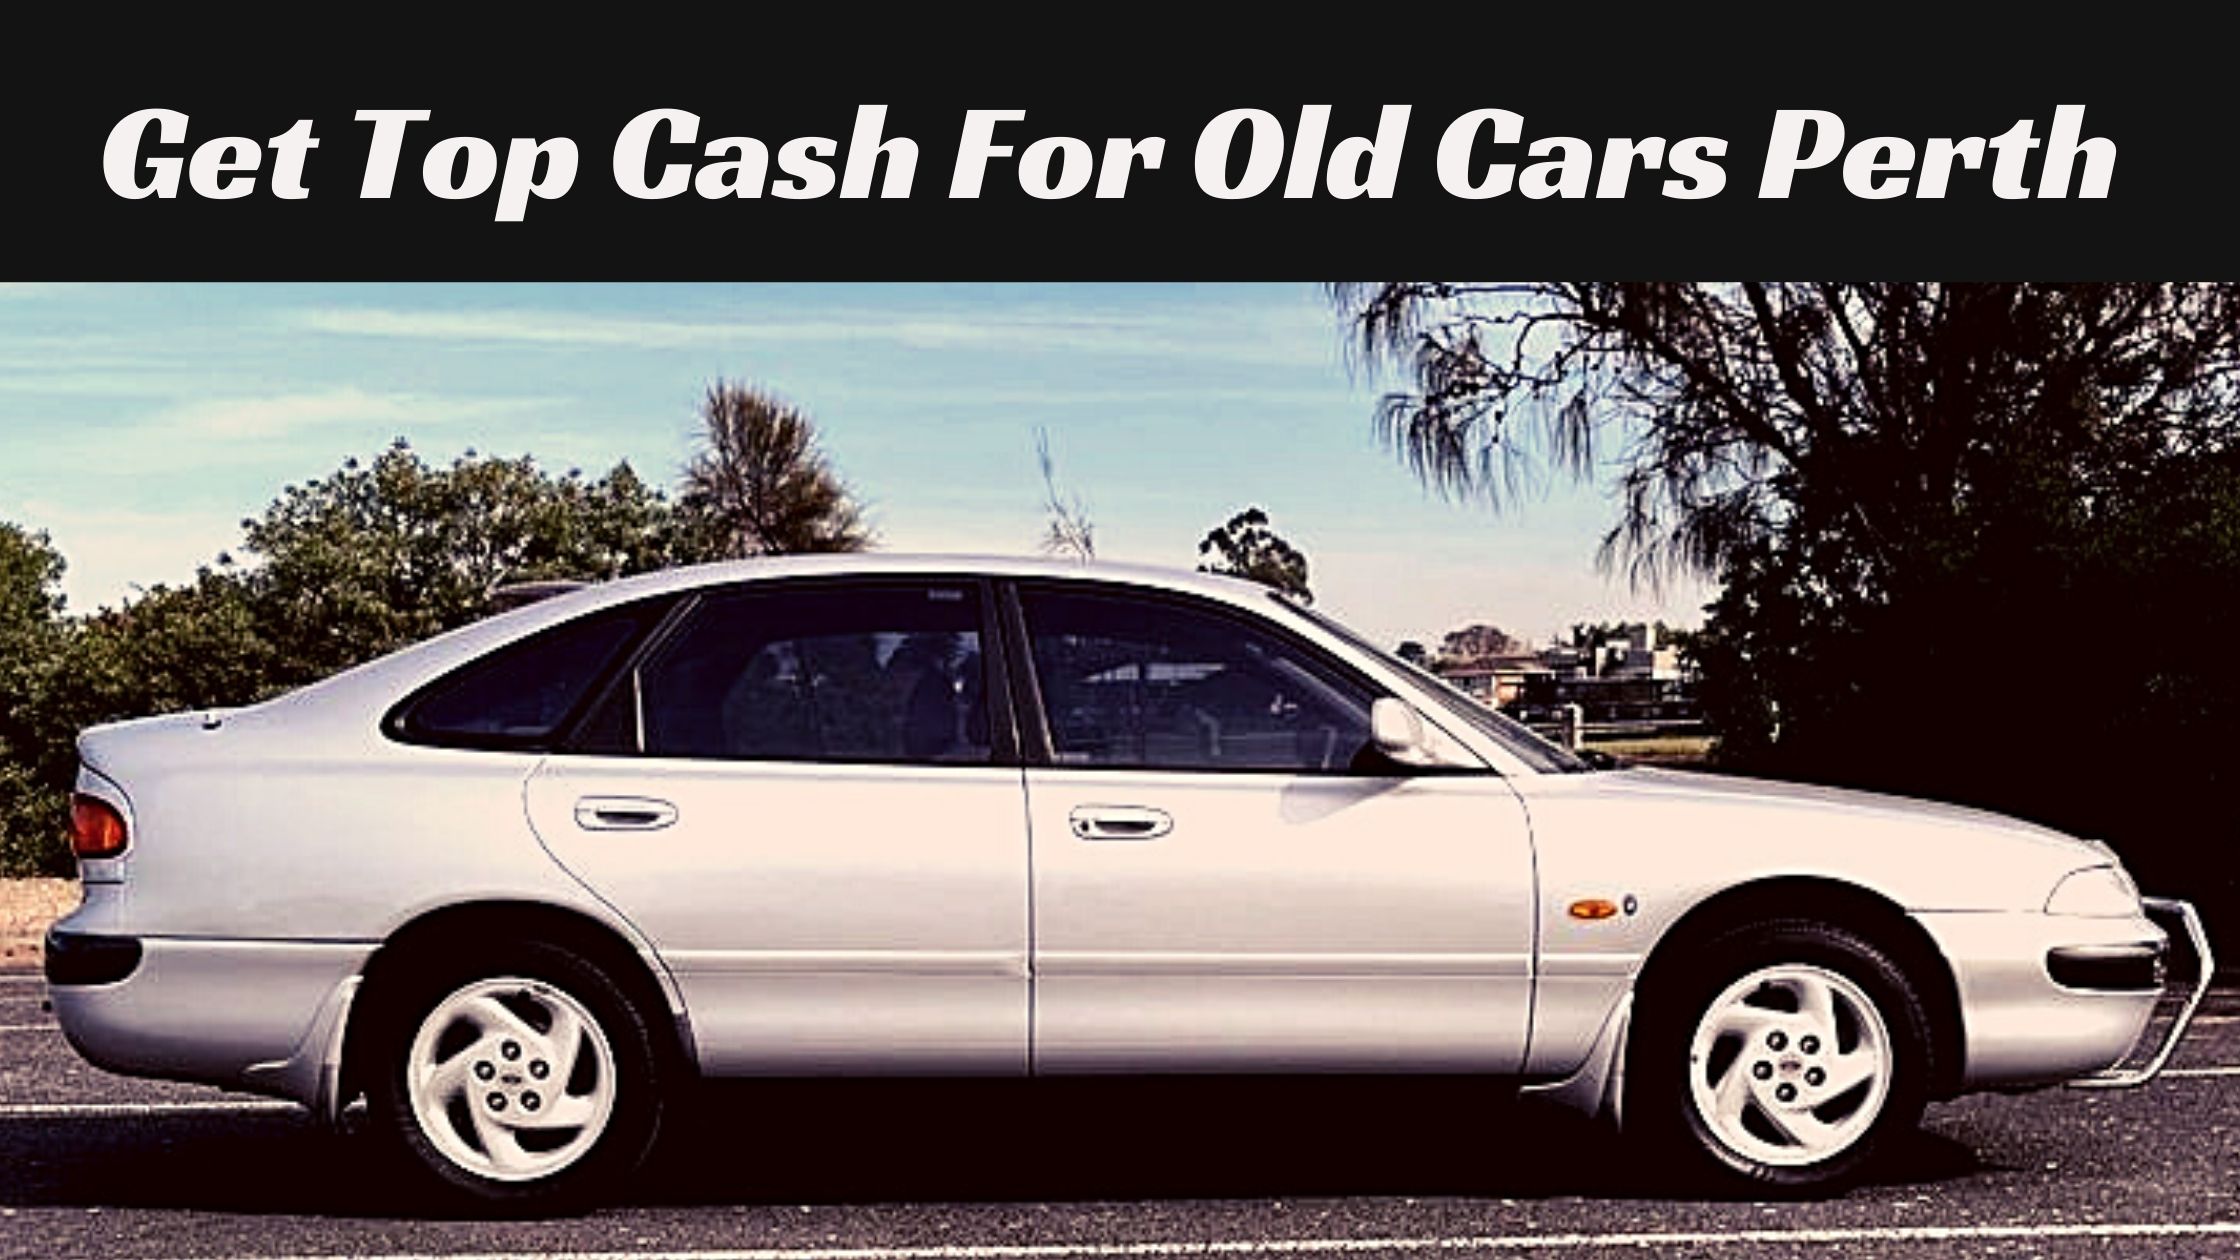 Cash-For-Old-Cars-Perth